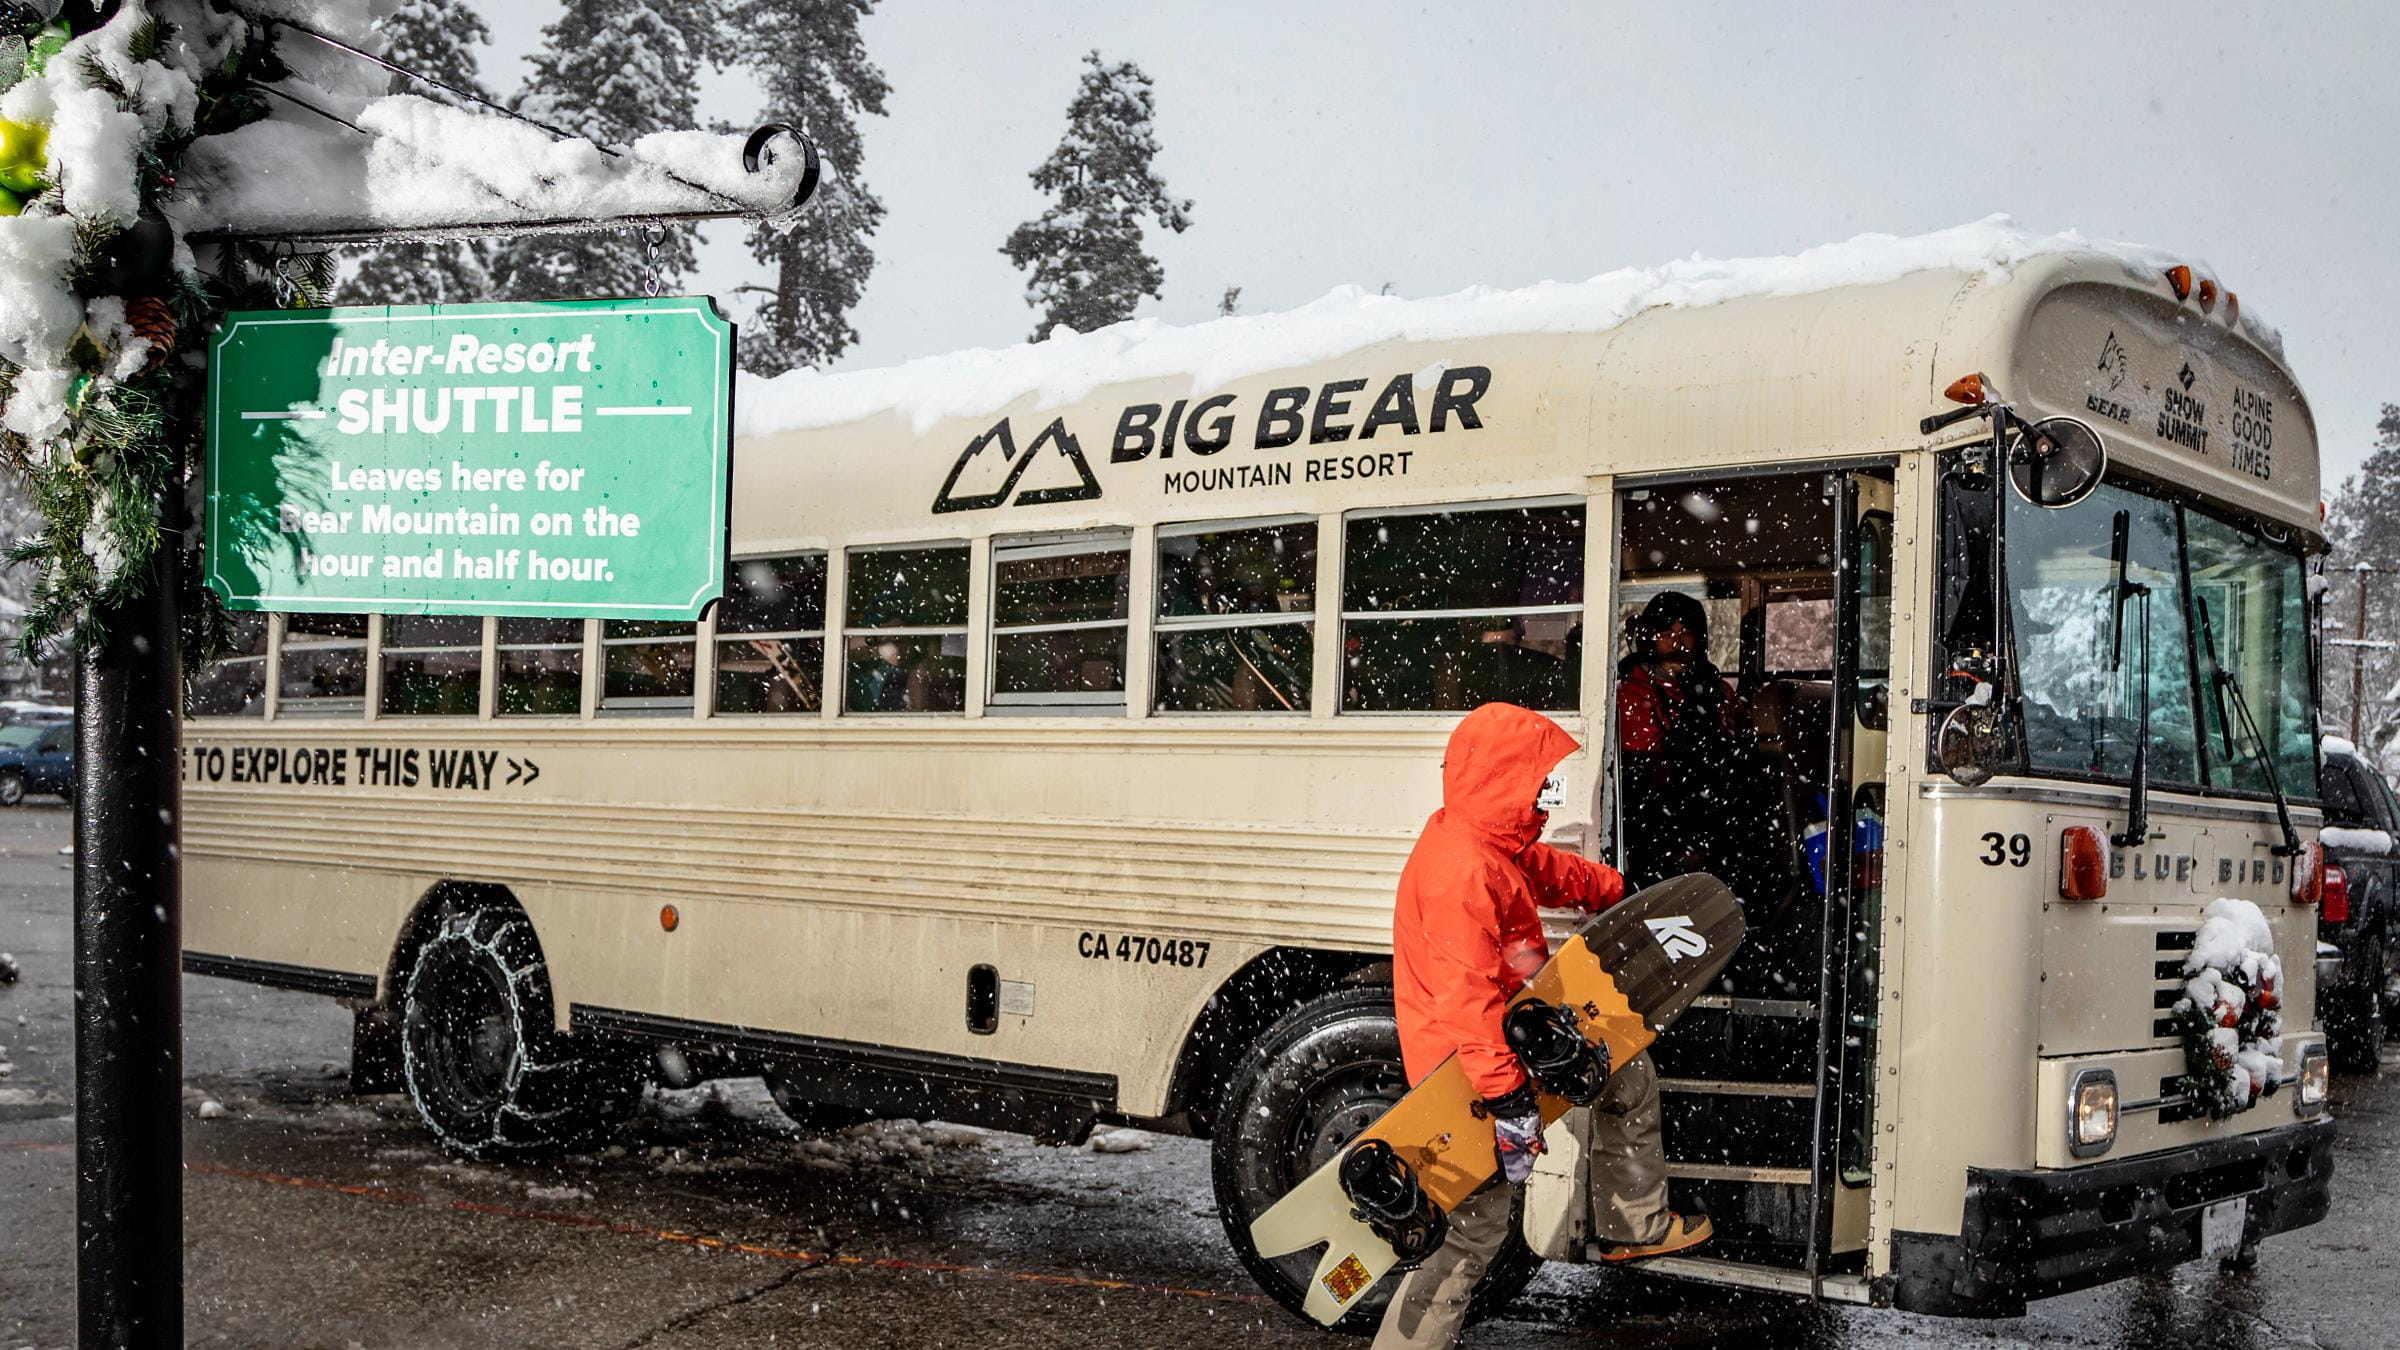 Snowboarder loading into a shuttle bus